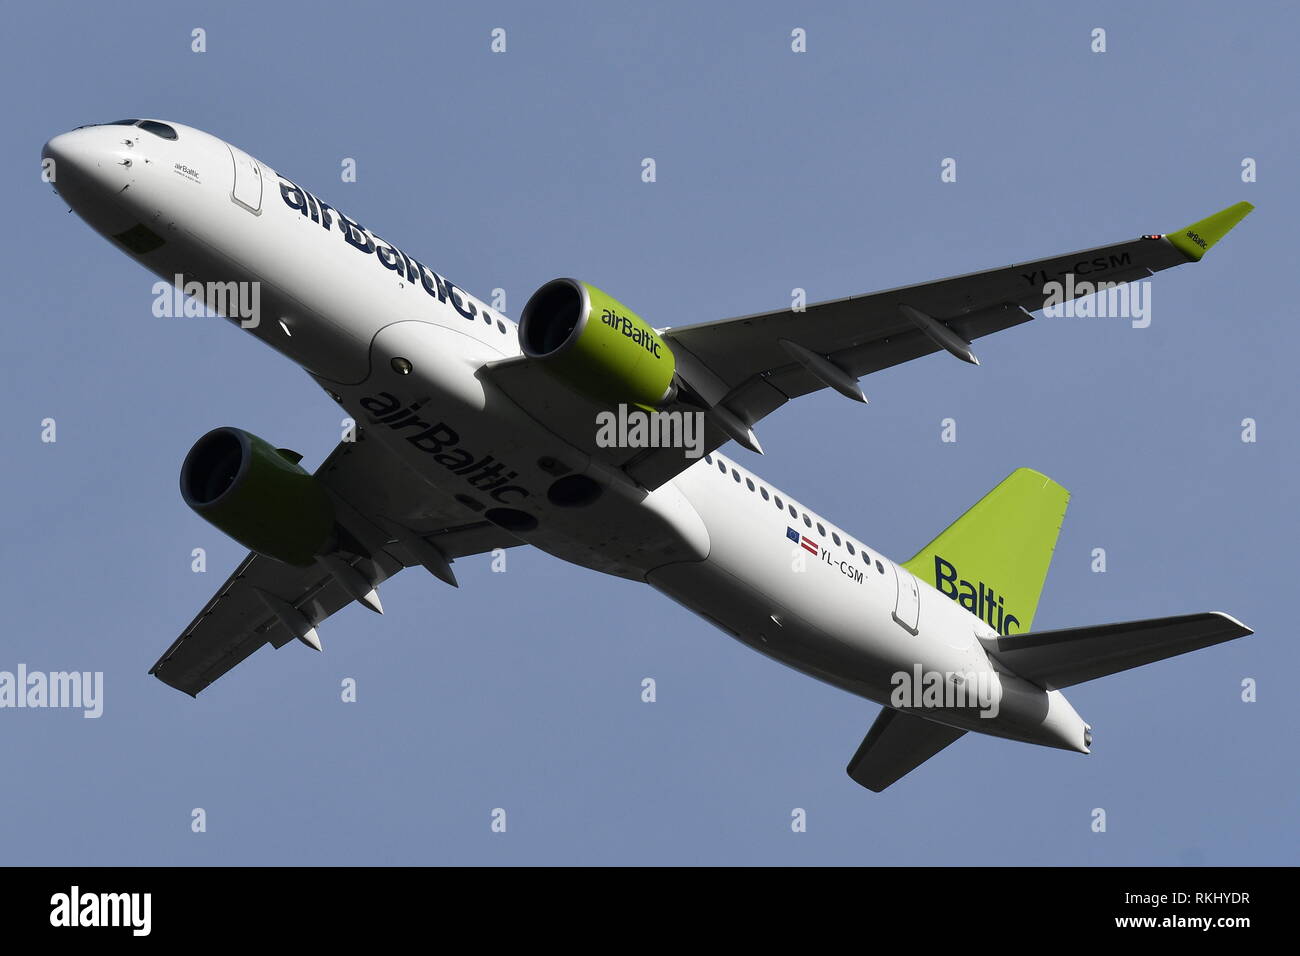 AIRBUS A220-300 (BOMBARDIER C SERIES)  YL-CSM OF AIR BALTIC. Stock Photo